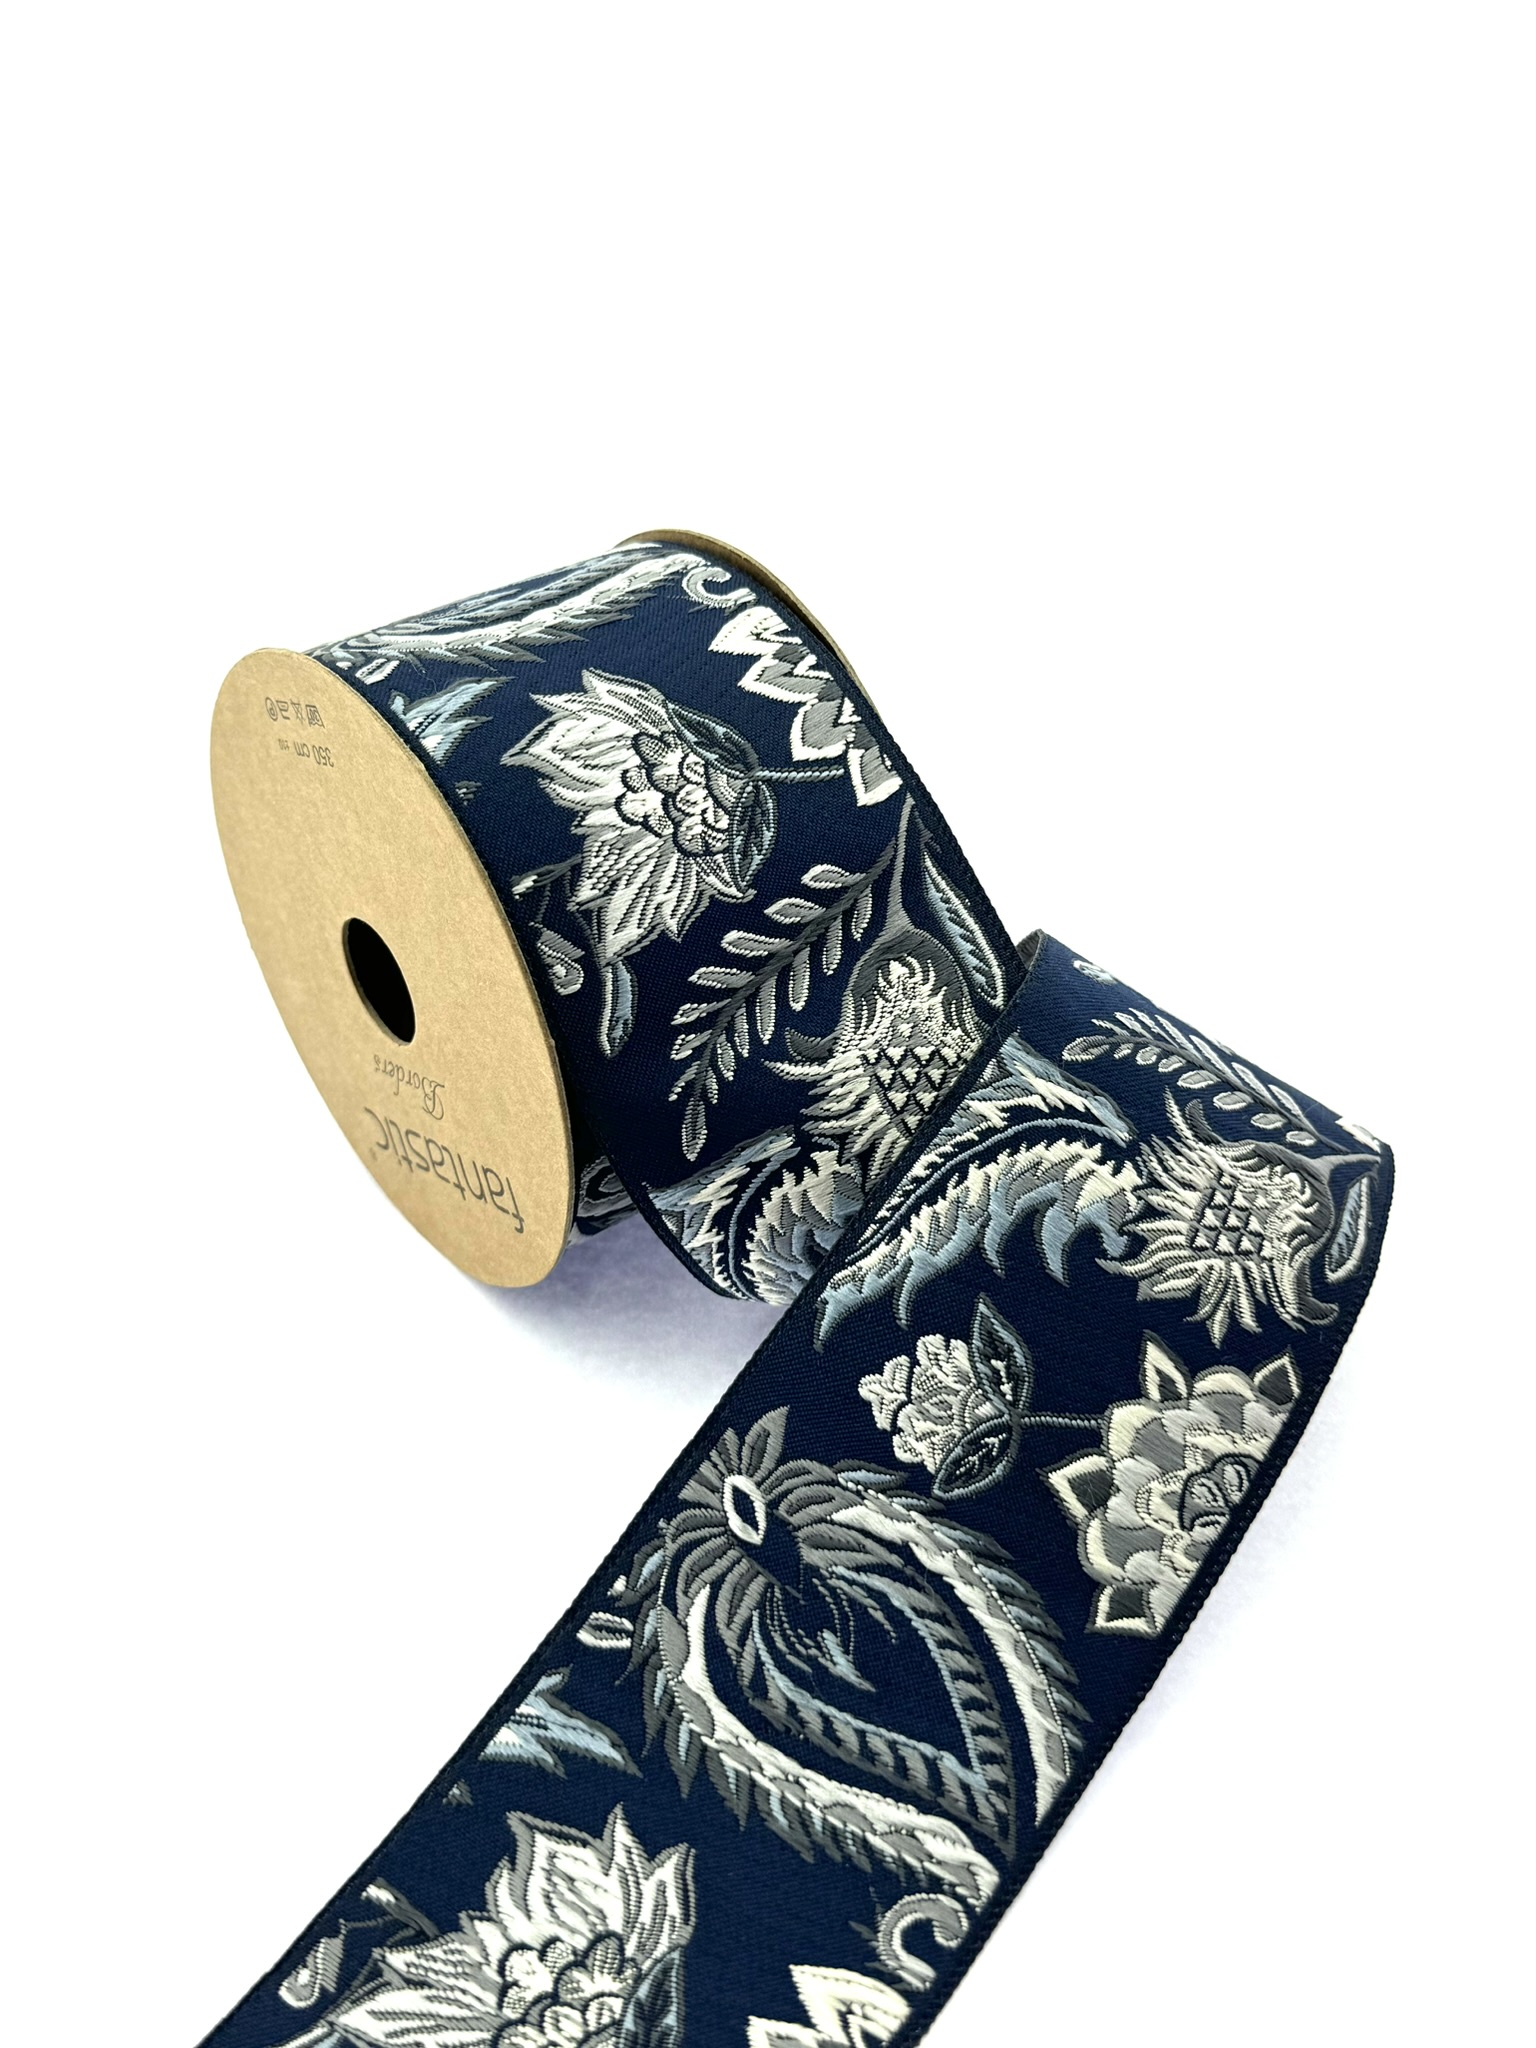 Floral Drapery Banding Tape, Embroidery Trim, 2.75 inch Woven Trim for Curtains and Cushions, Drapery Trim Tape, Jacquard Border Trim, 70216